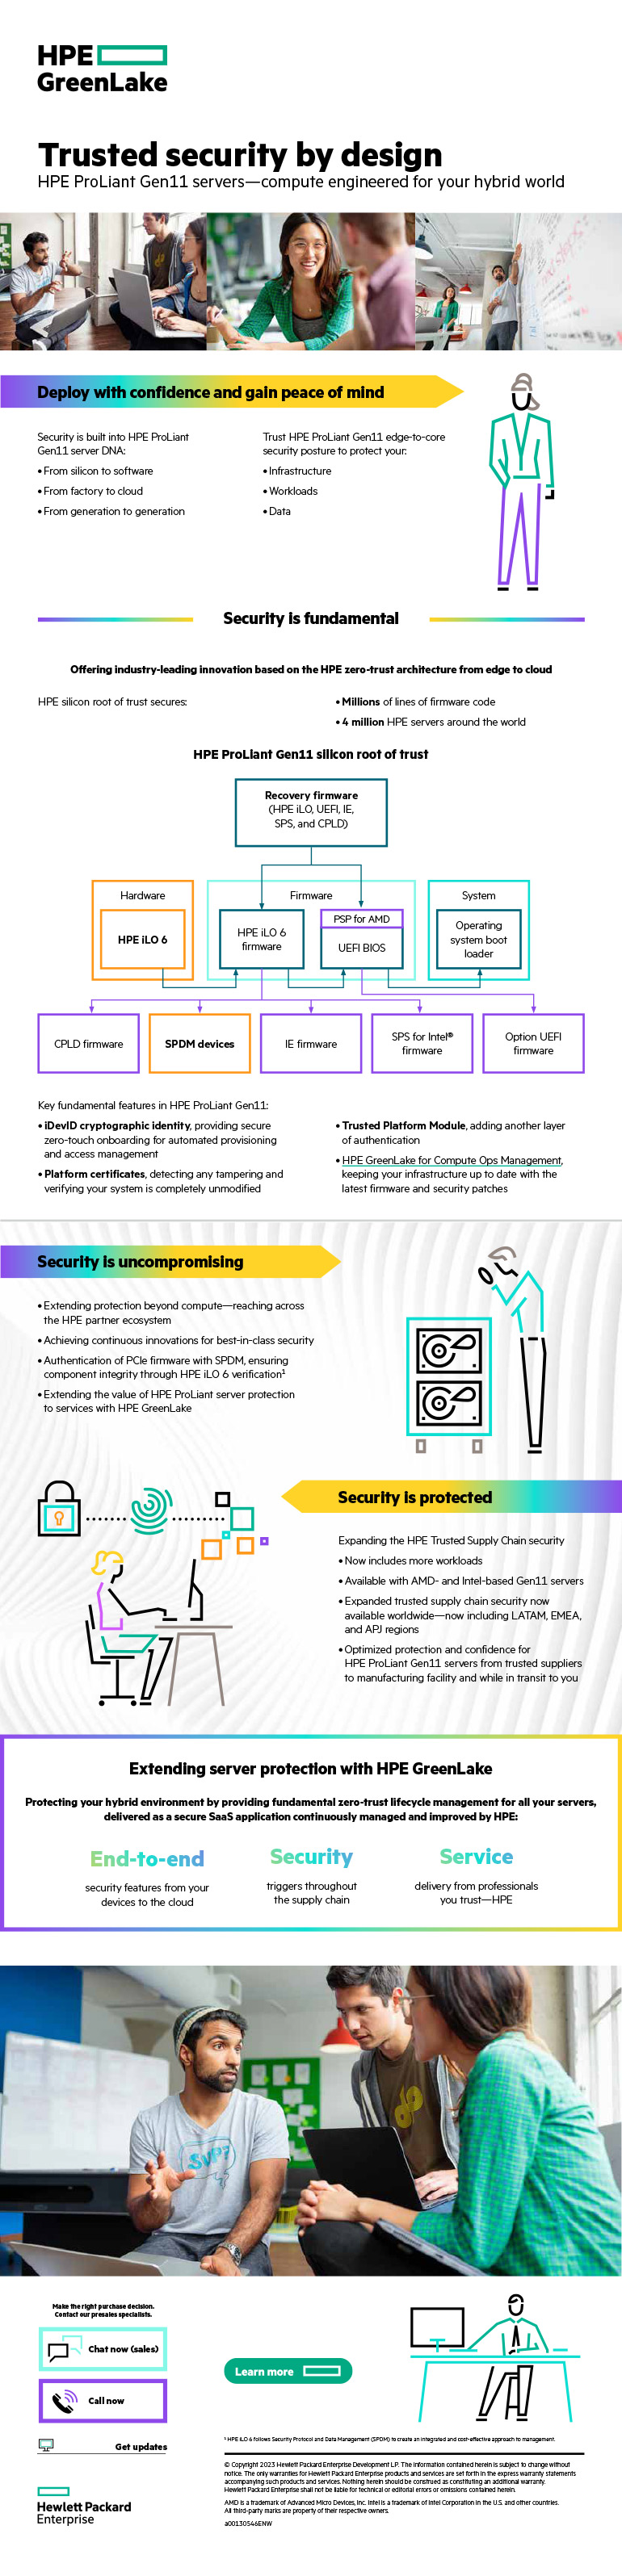 Trusted Security by Design HPE infographic